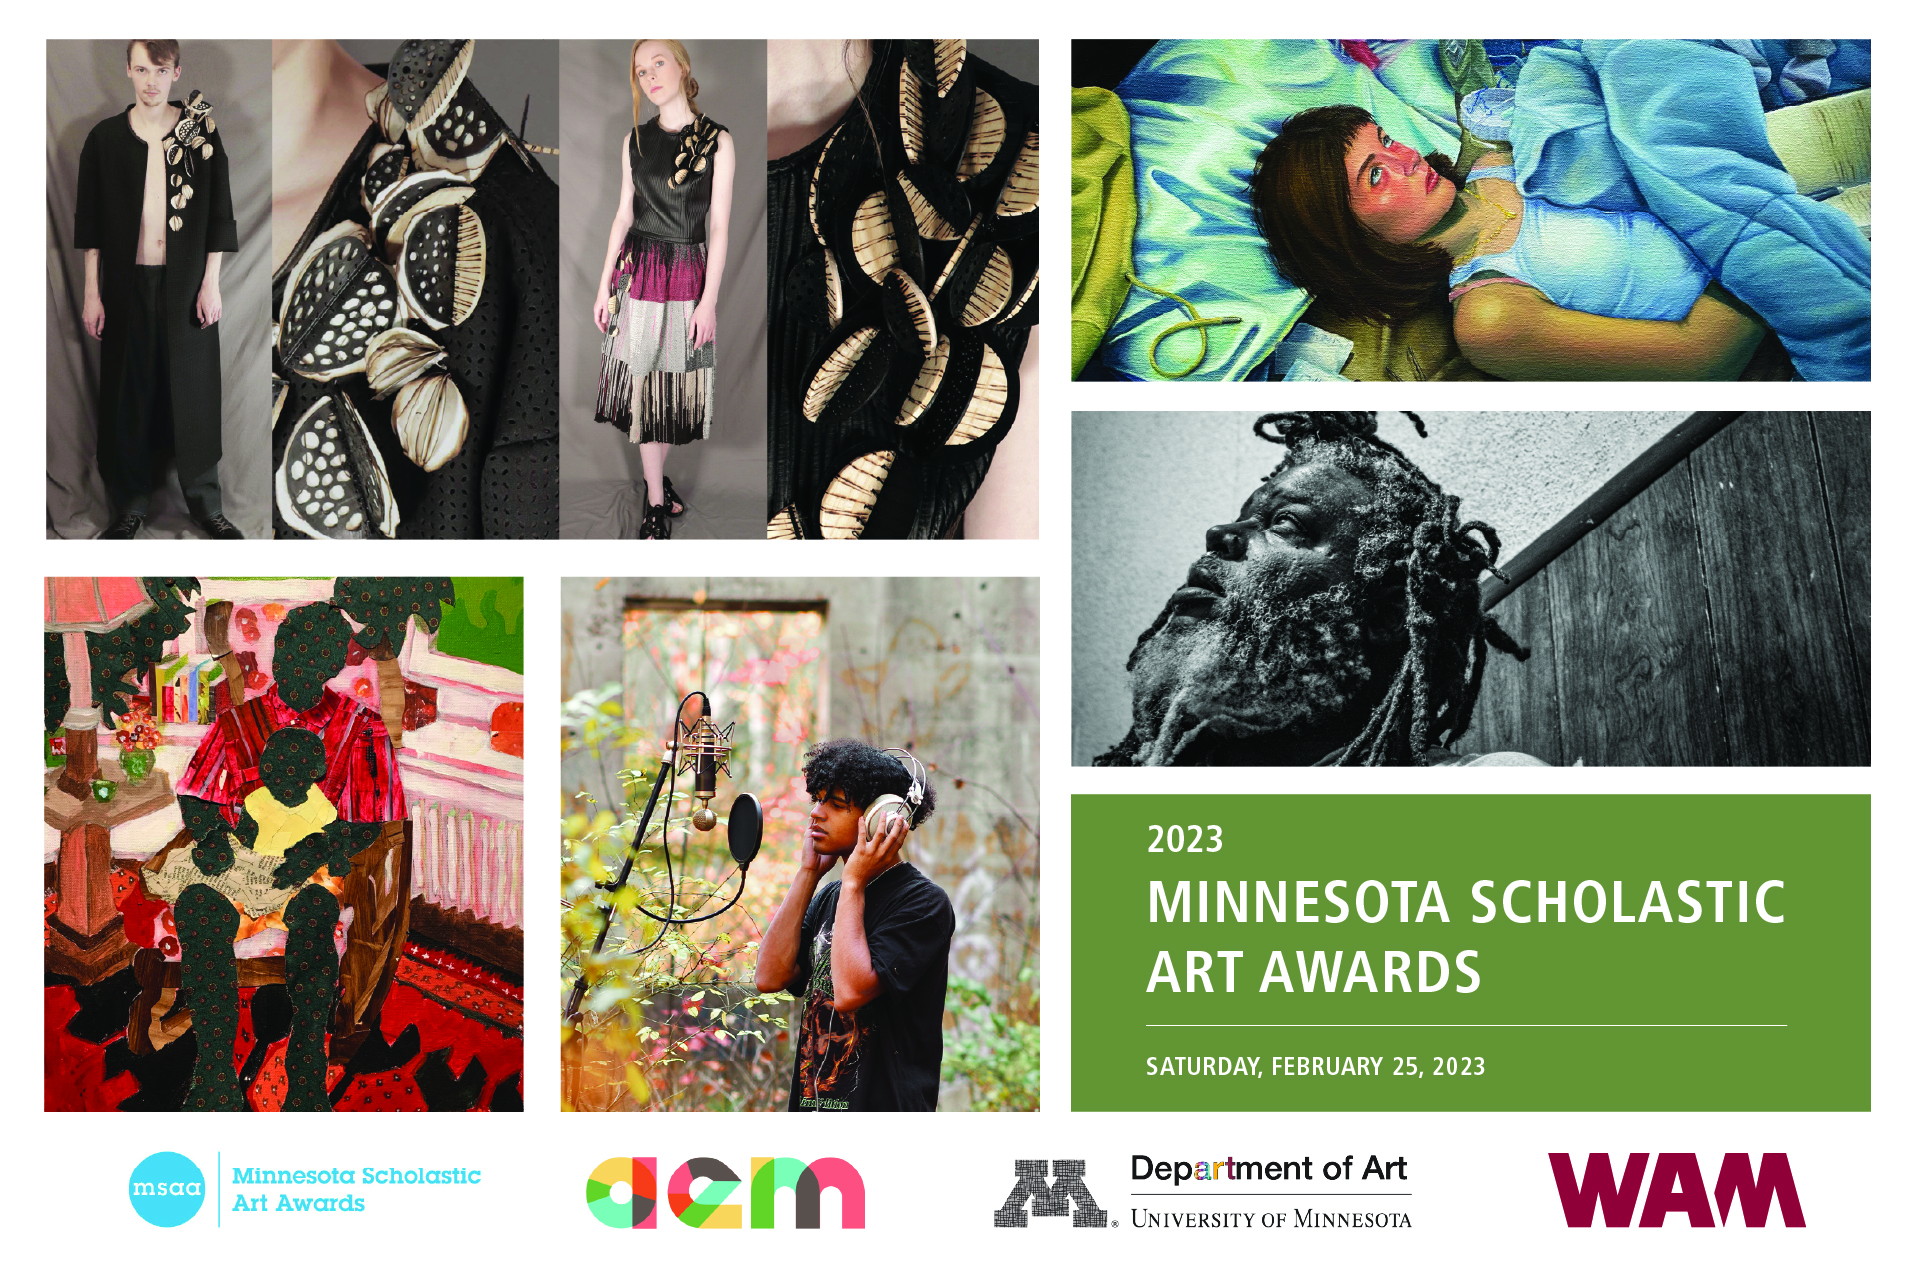 collection of art with text "2023 Minnesota Scholastic Art Awards"